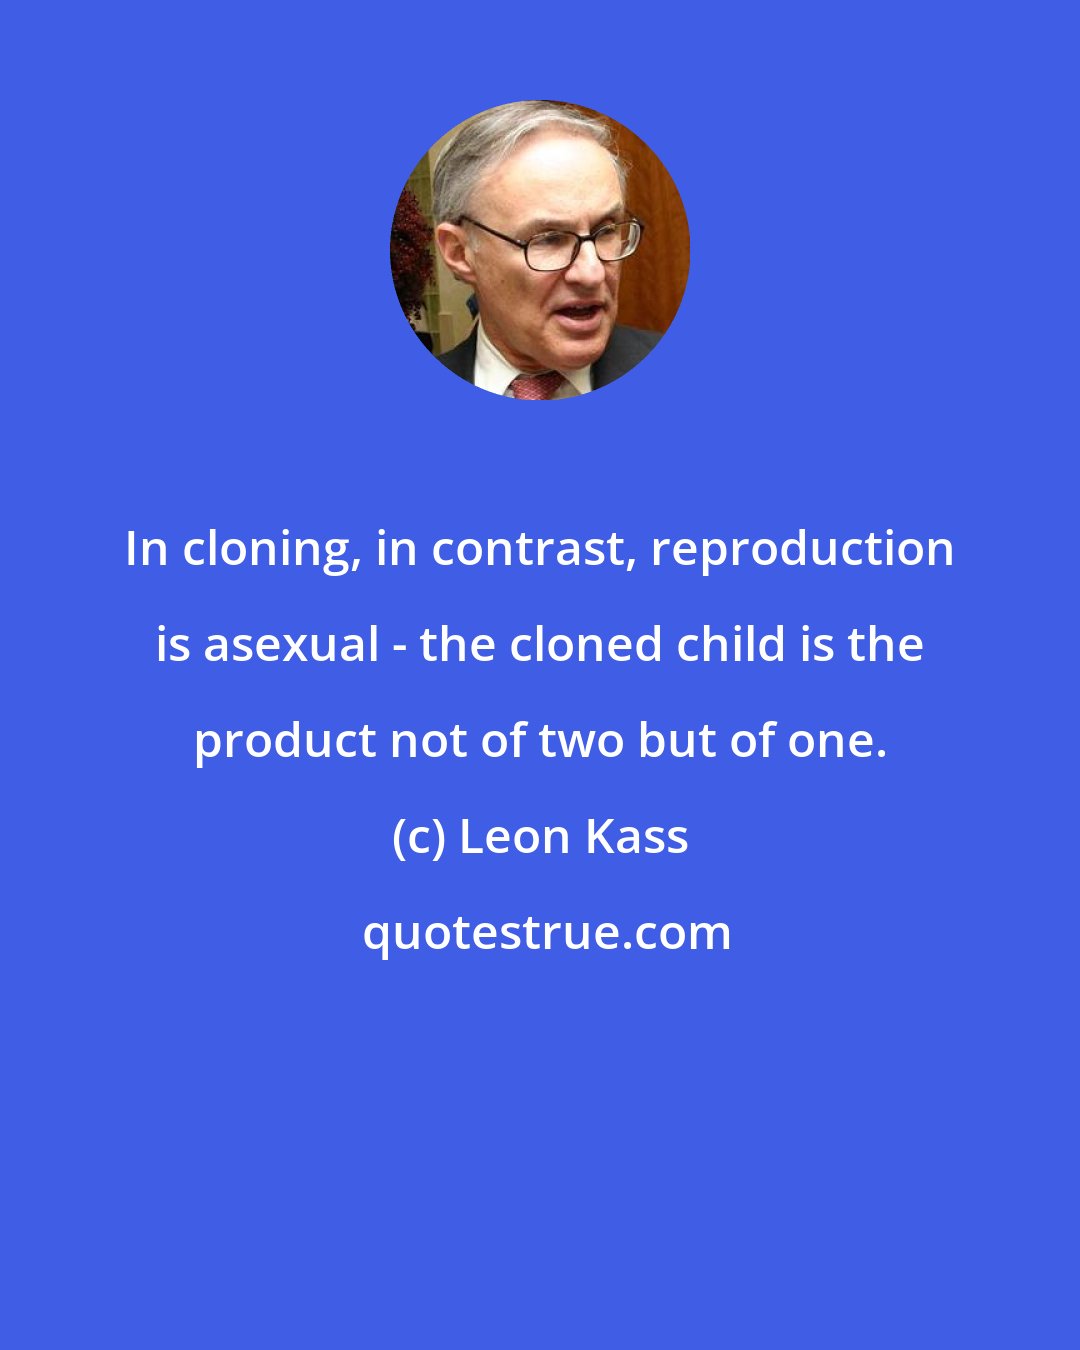 Leon Kass: In cloning, in contrast, reproduction is asexual - the cloned child is the product not of two but of one.